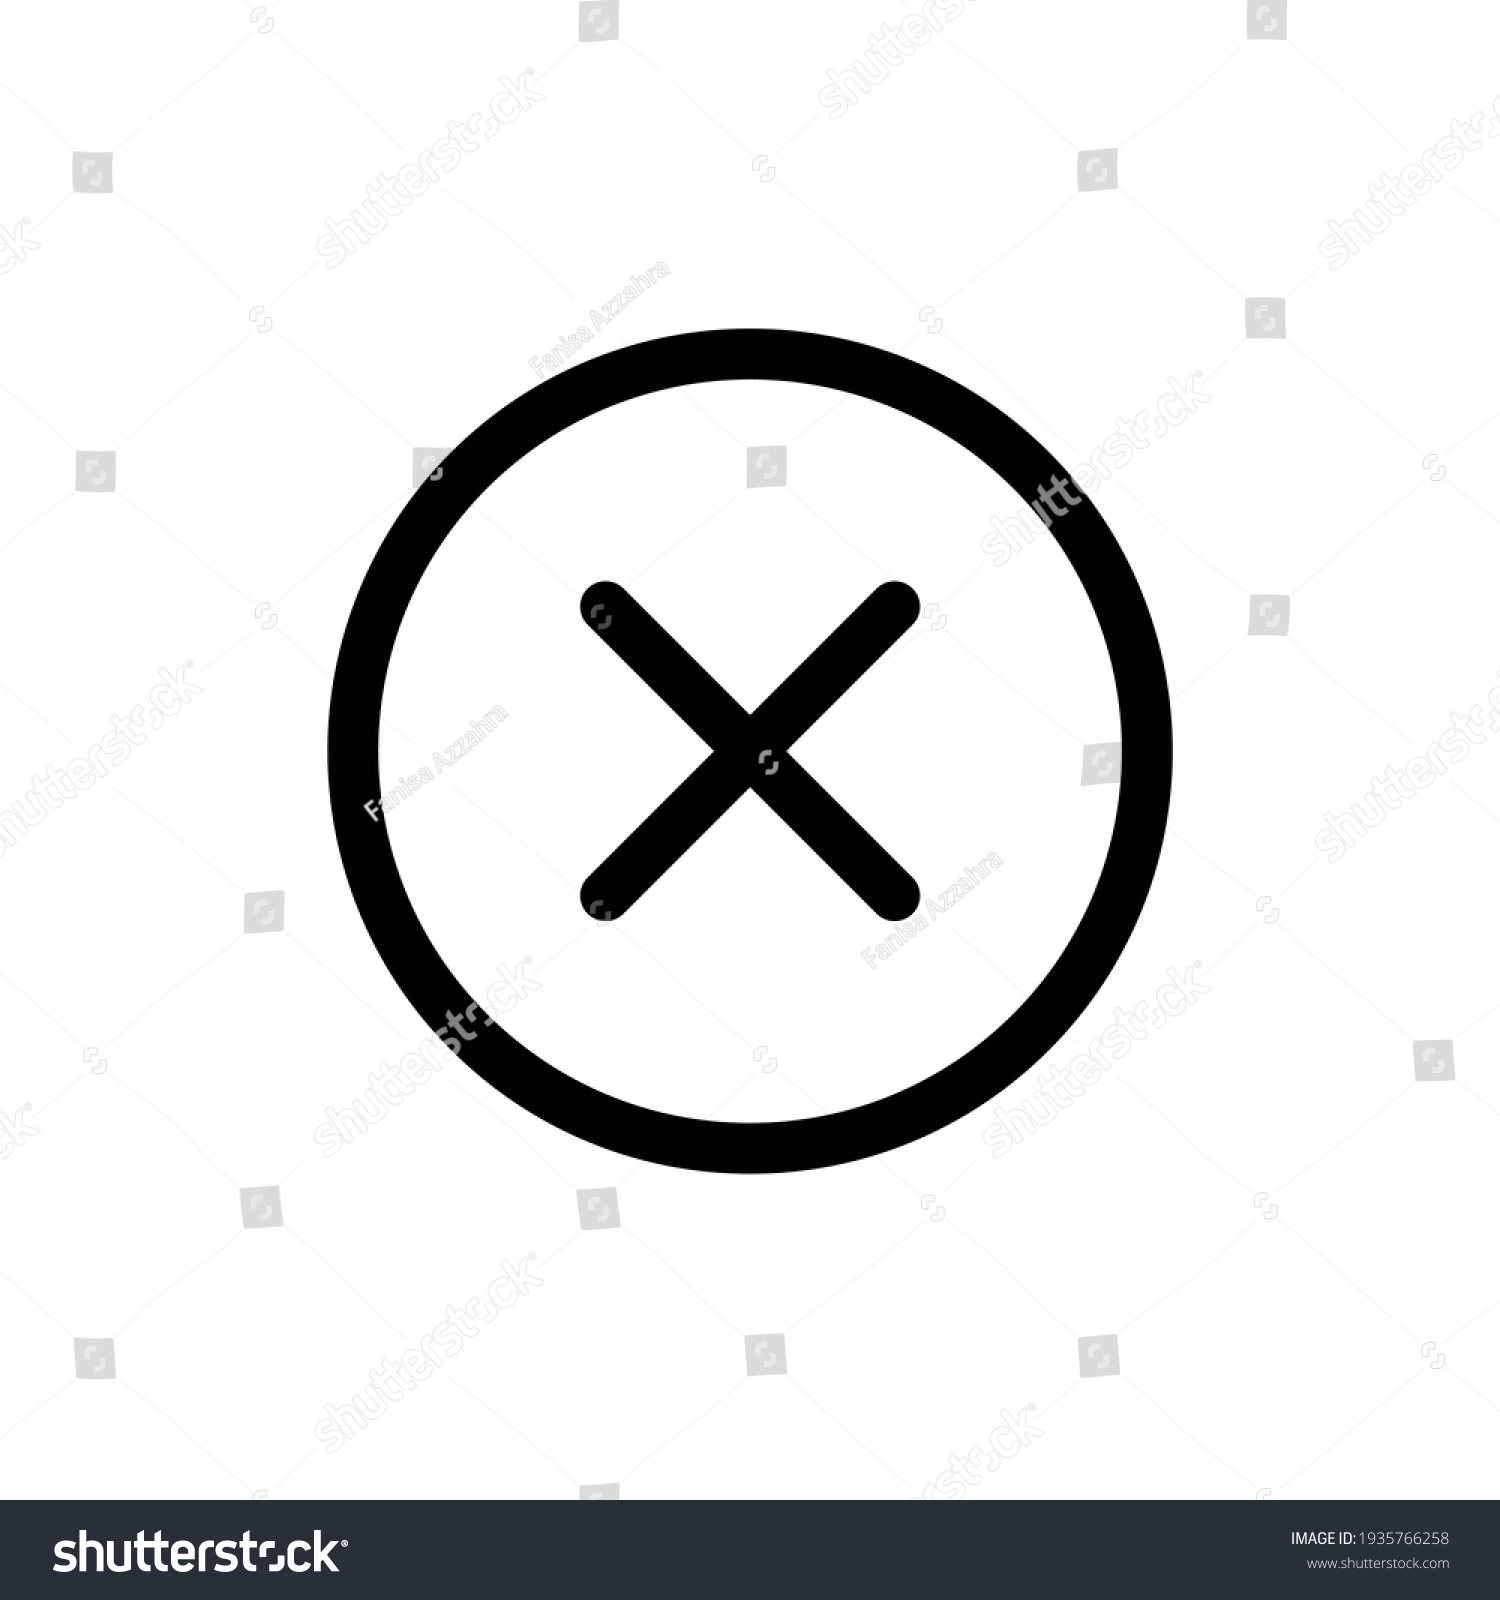 Cancel Vector Icon. x or deny line art vector icon for apps and websites. cancel icon,vector illustration. Flat design style. vector cancel icon illustration isolated on White background #1935766258